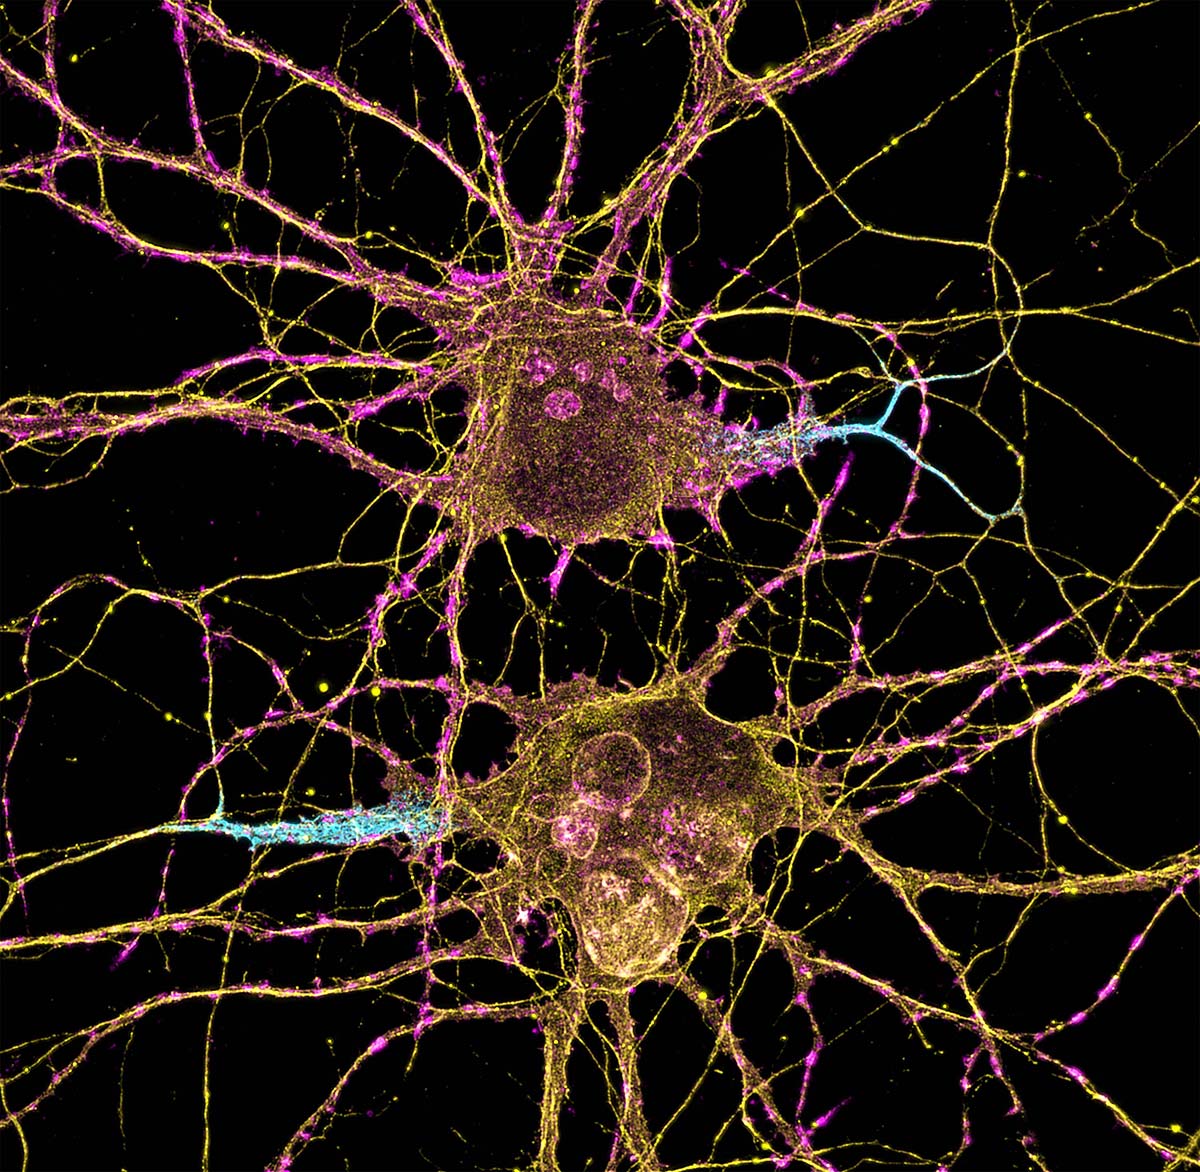 Picture of two neuron cell bodies, side by side. The axon of each neurons is colored blue.